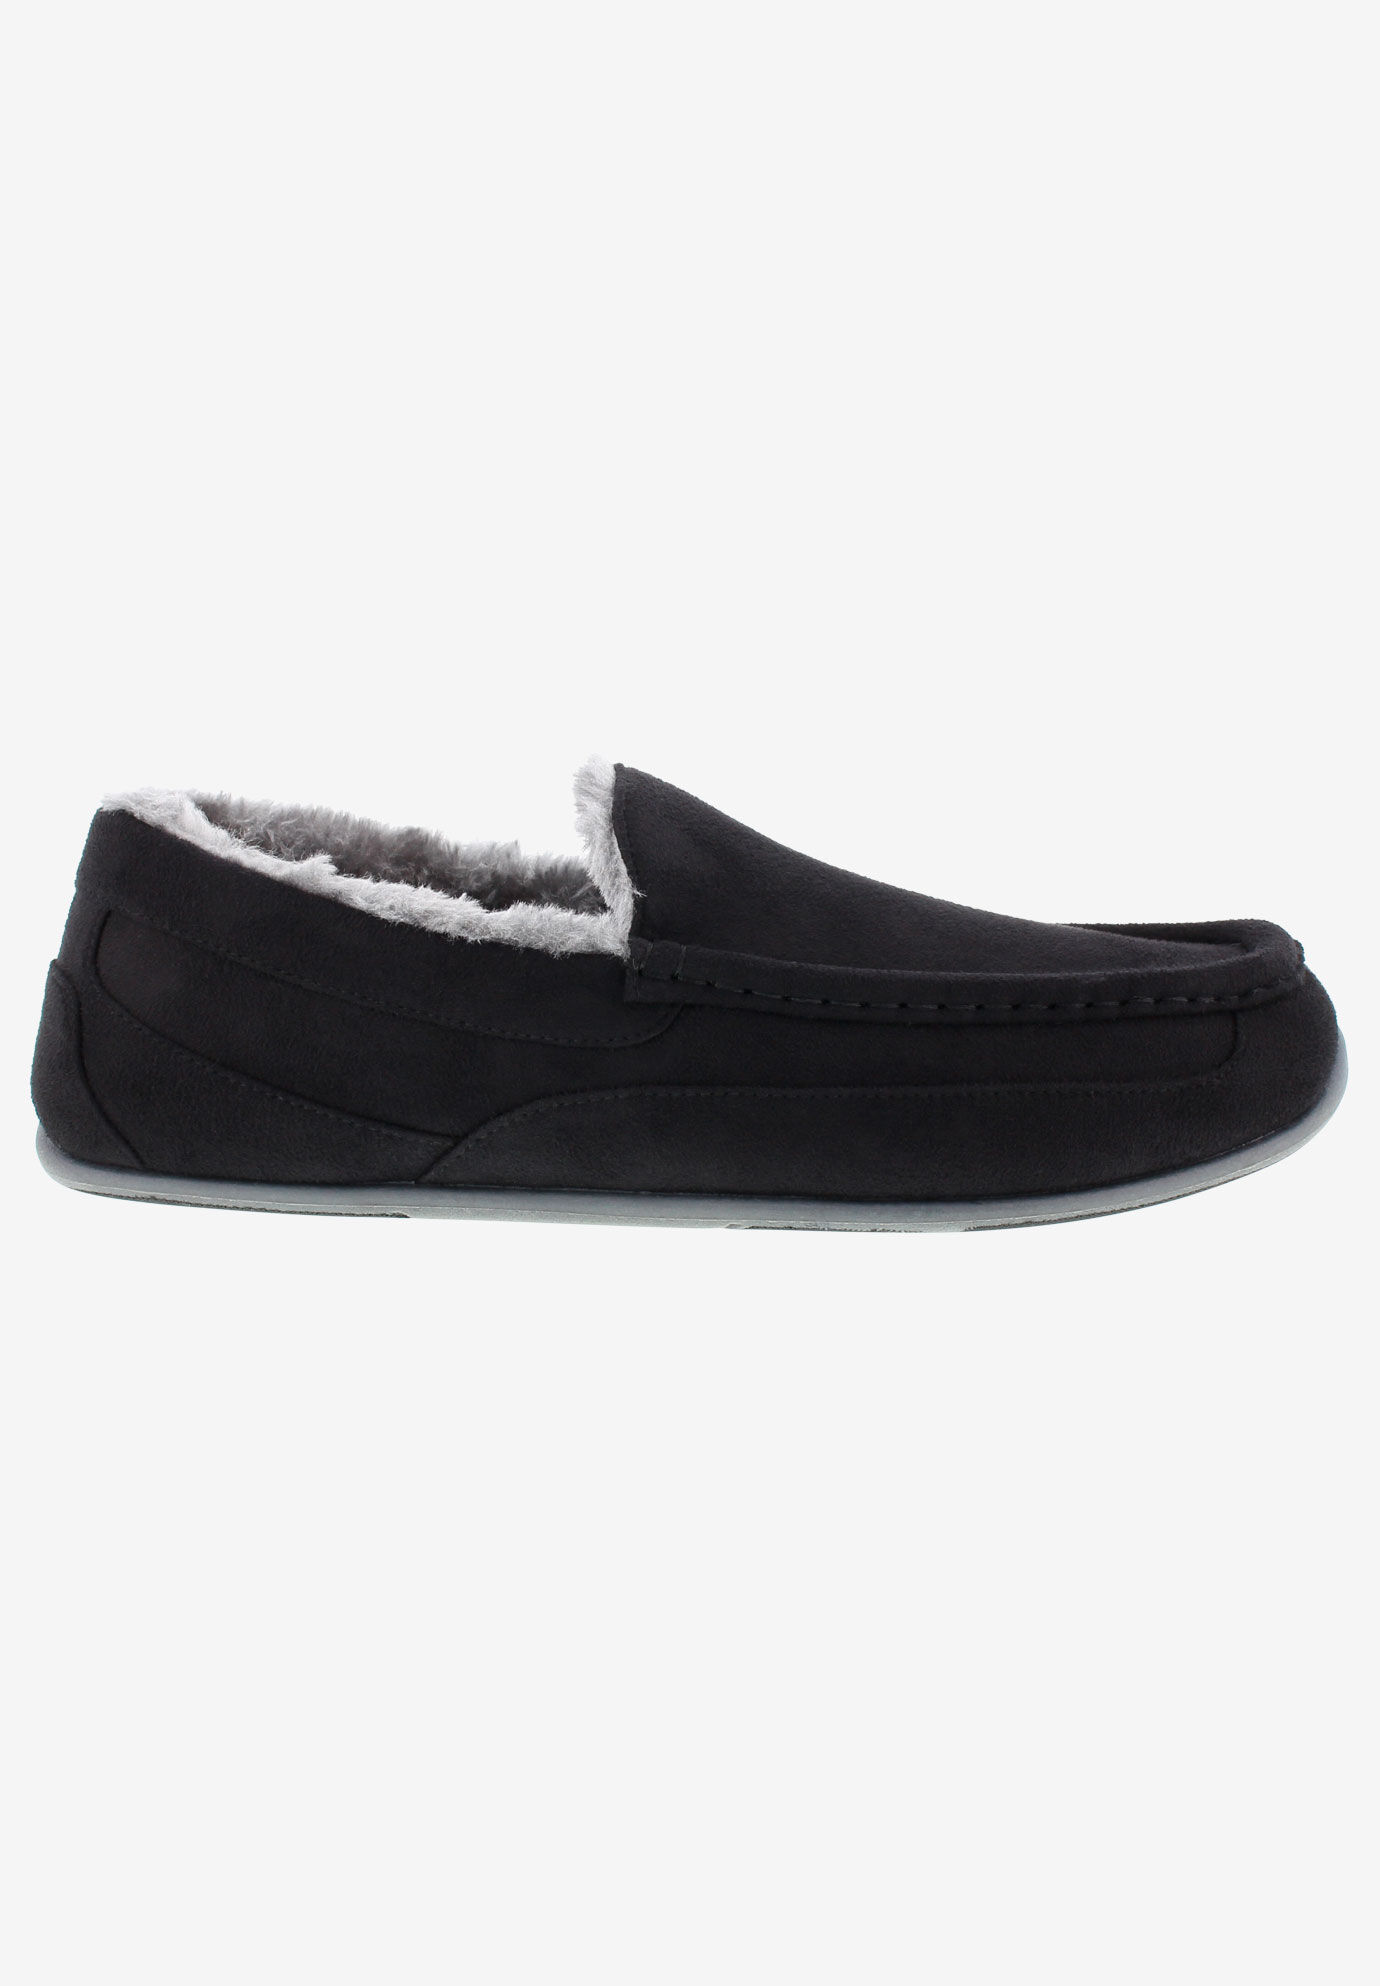 king size mens slippers